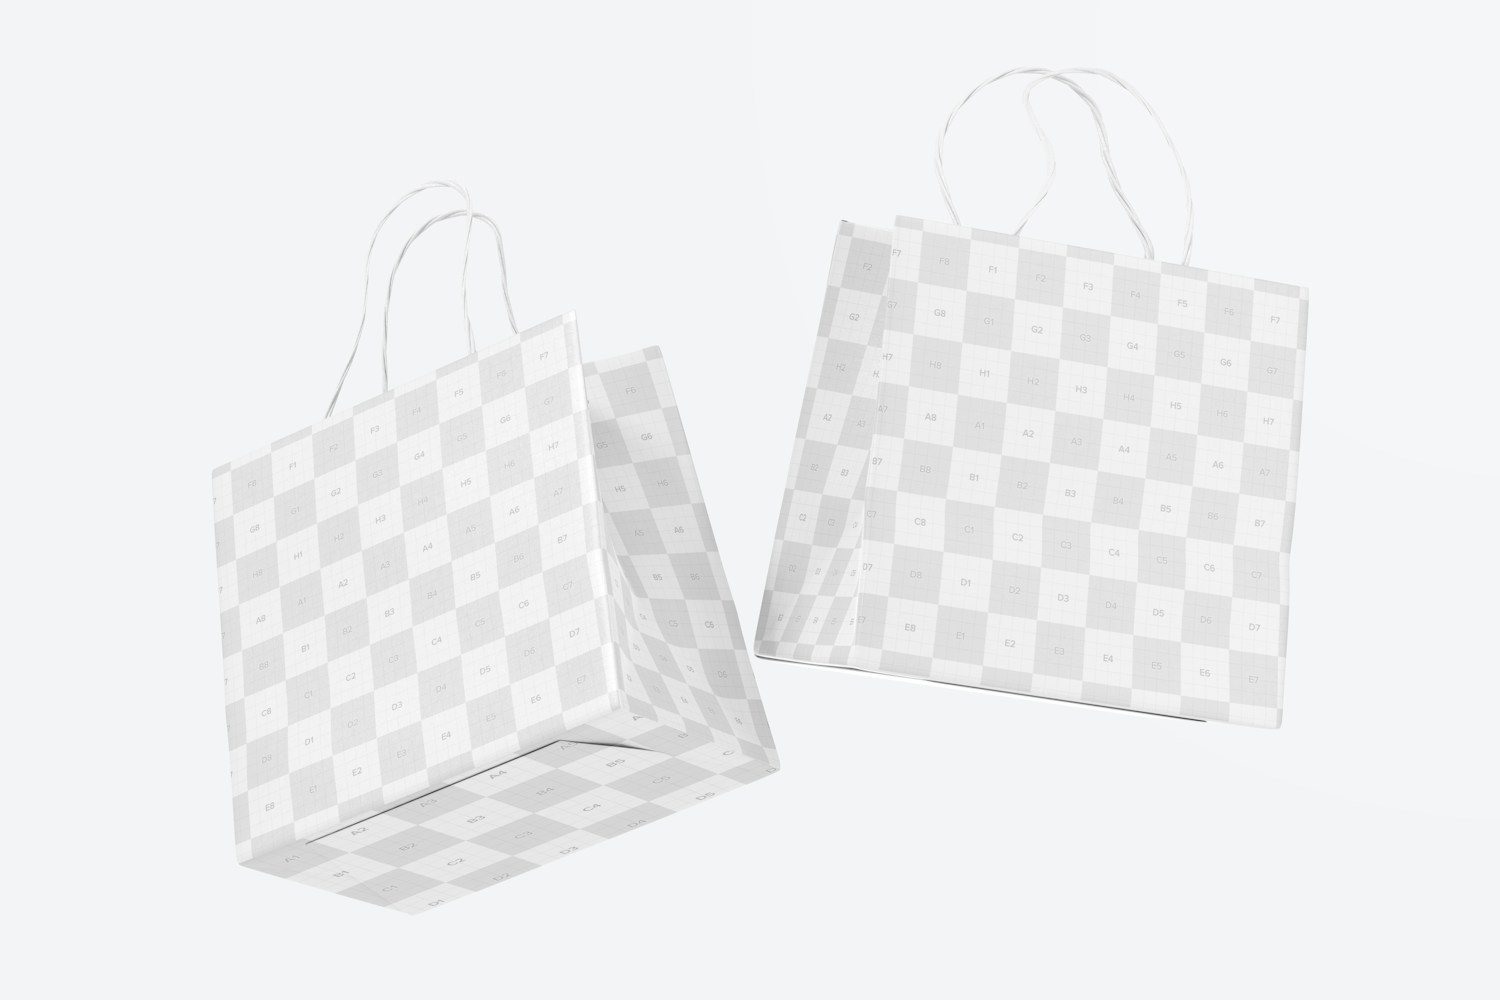 Small Paper Shopping Bags Mockup, Floating